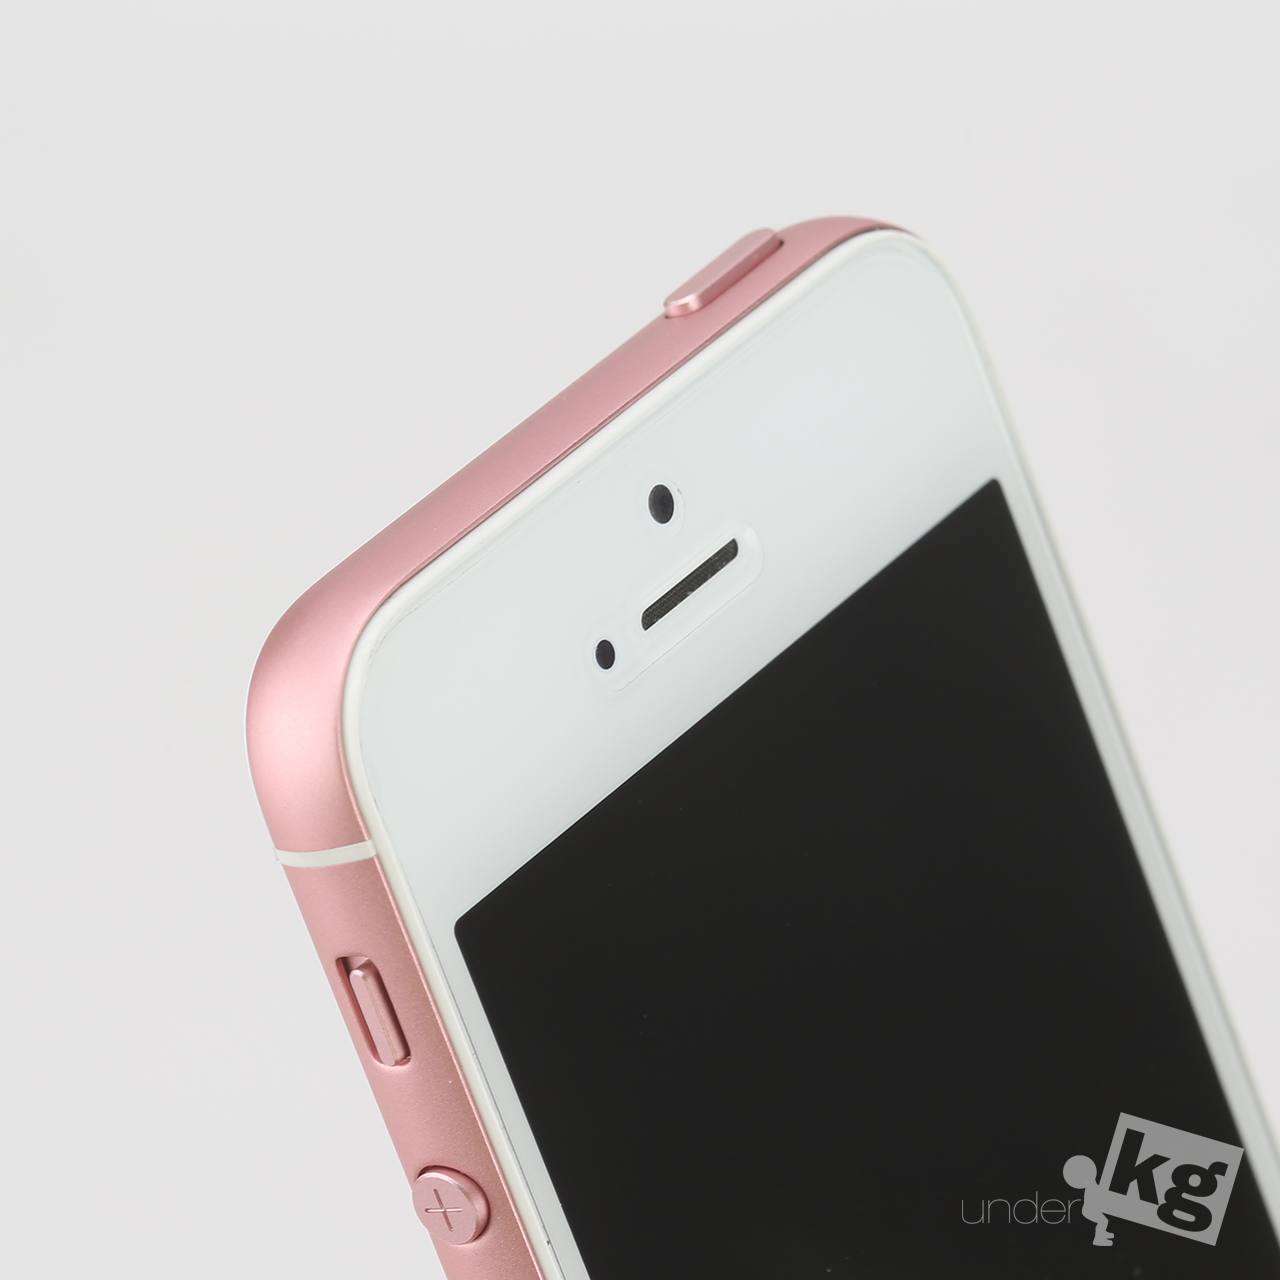 iphone5-to-iphone6-housing-change-pic5.jpg